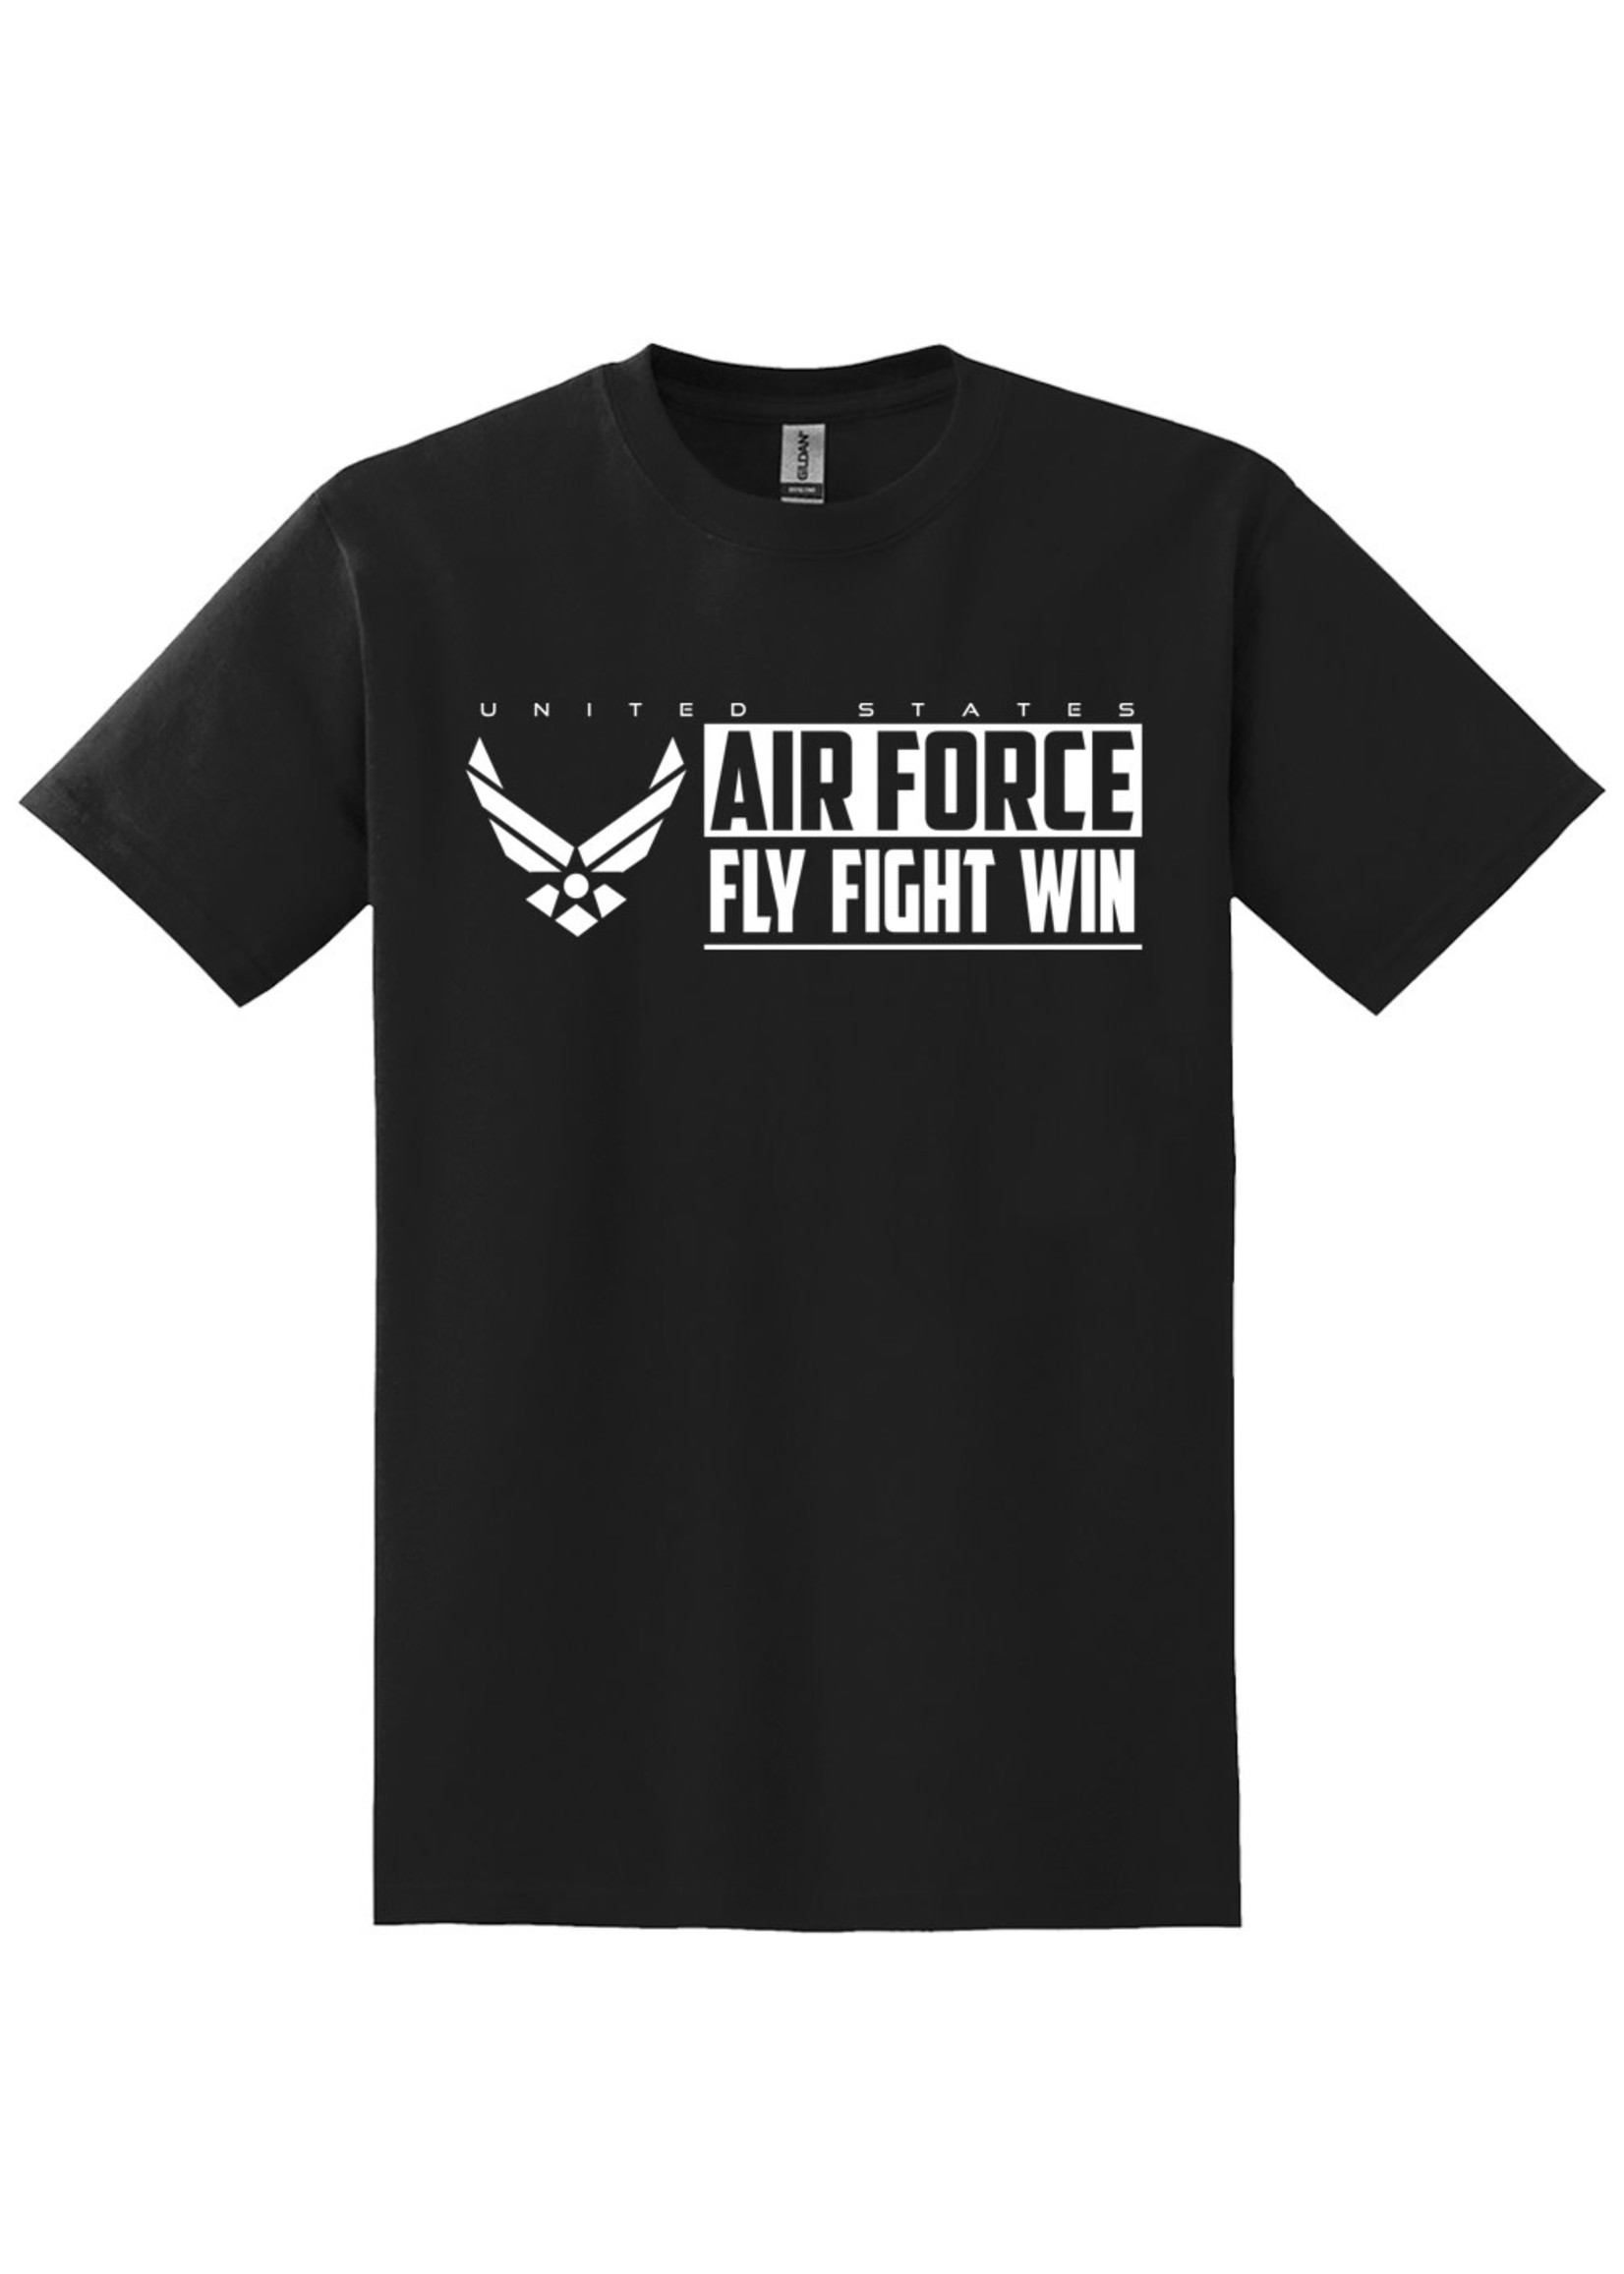 #44 - Air Force Fly Fight Win